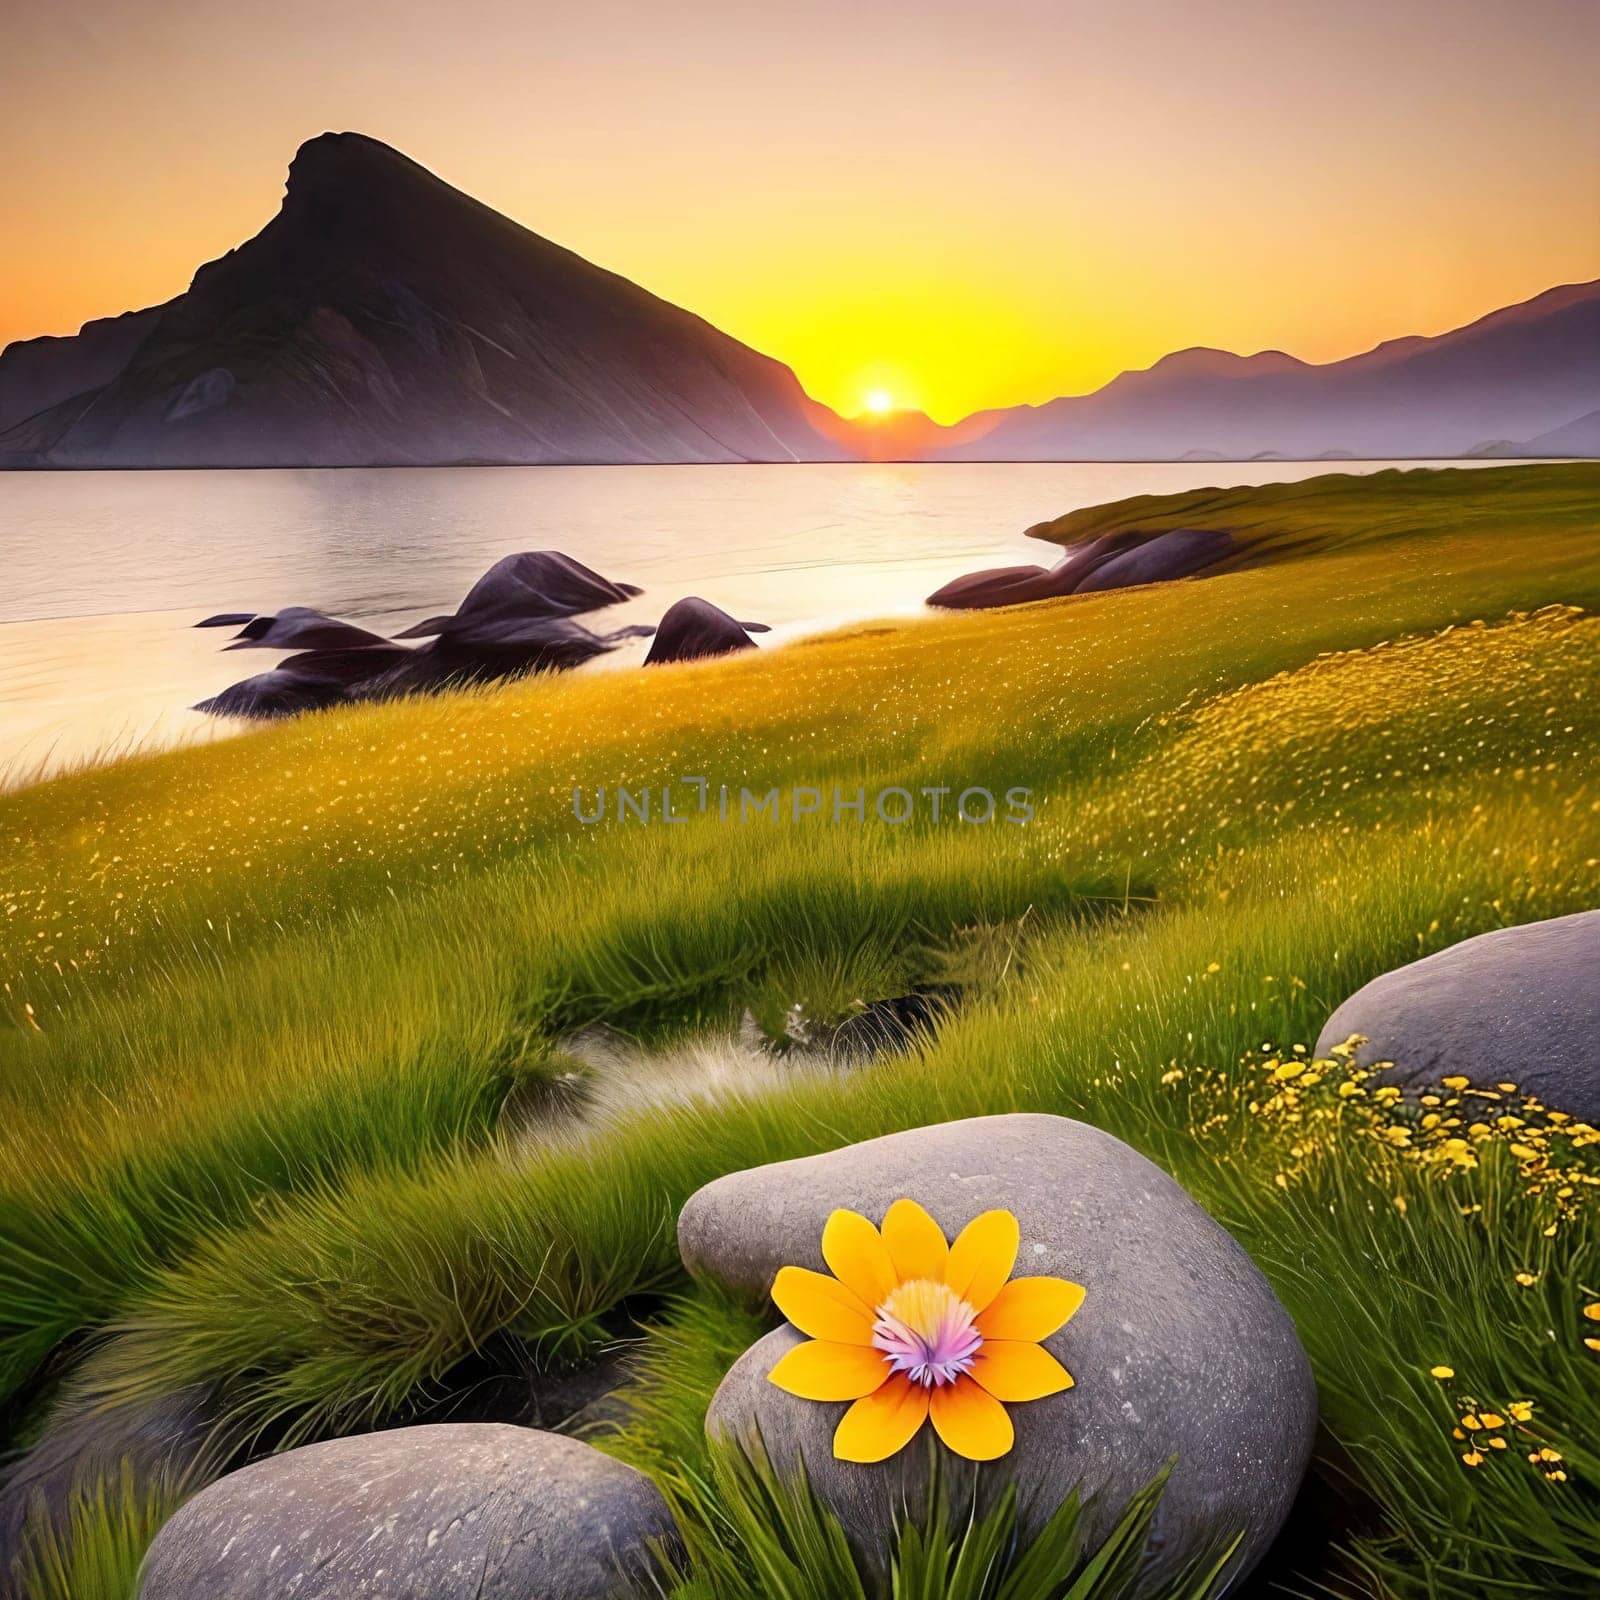 Inspirational Nature. A serene landscape photograph of a peaceful meadow at sunrise with a single flower by GoodOlga